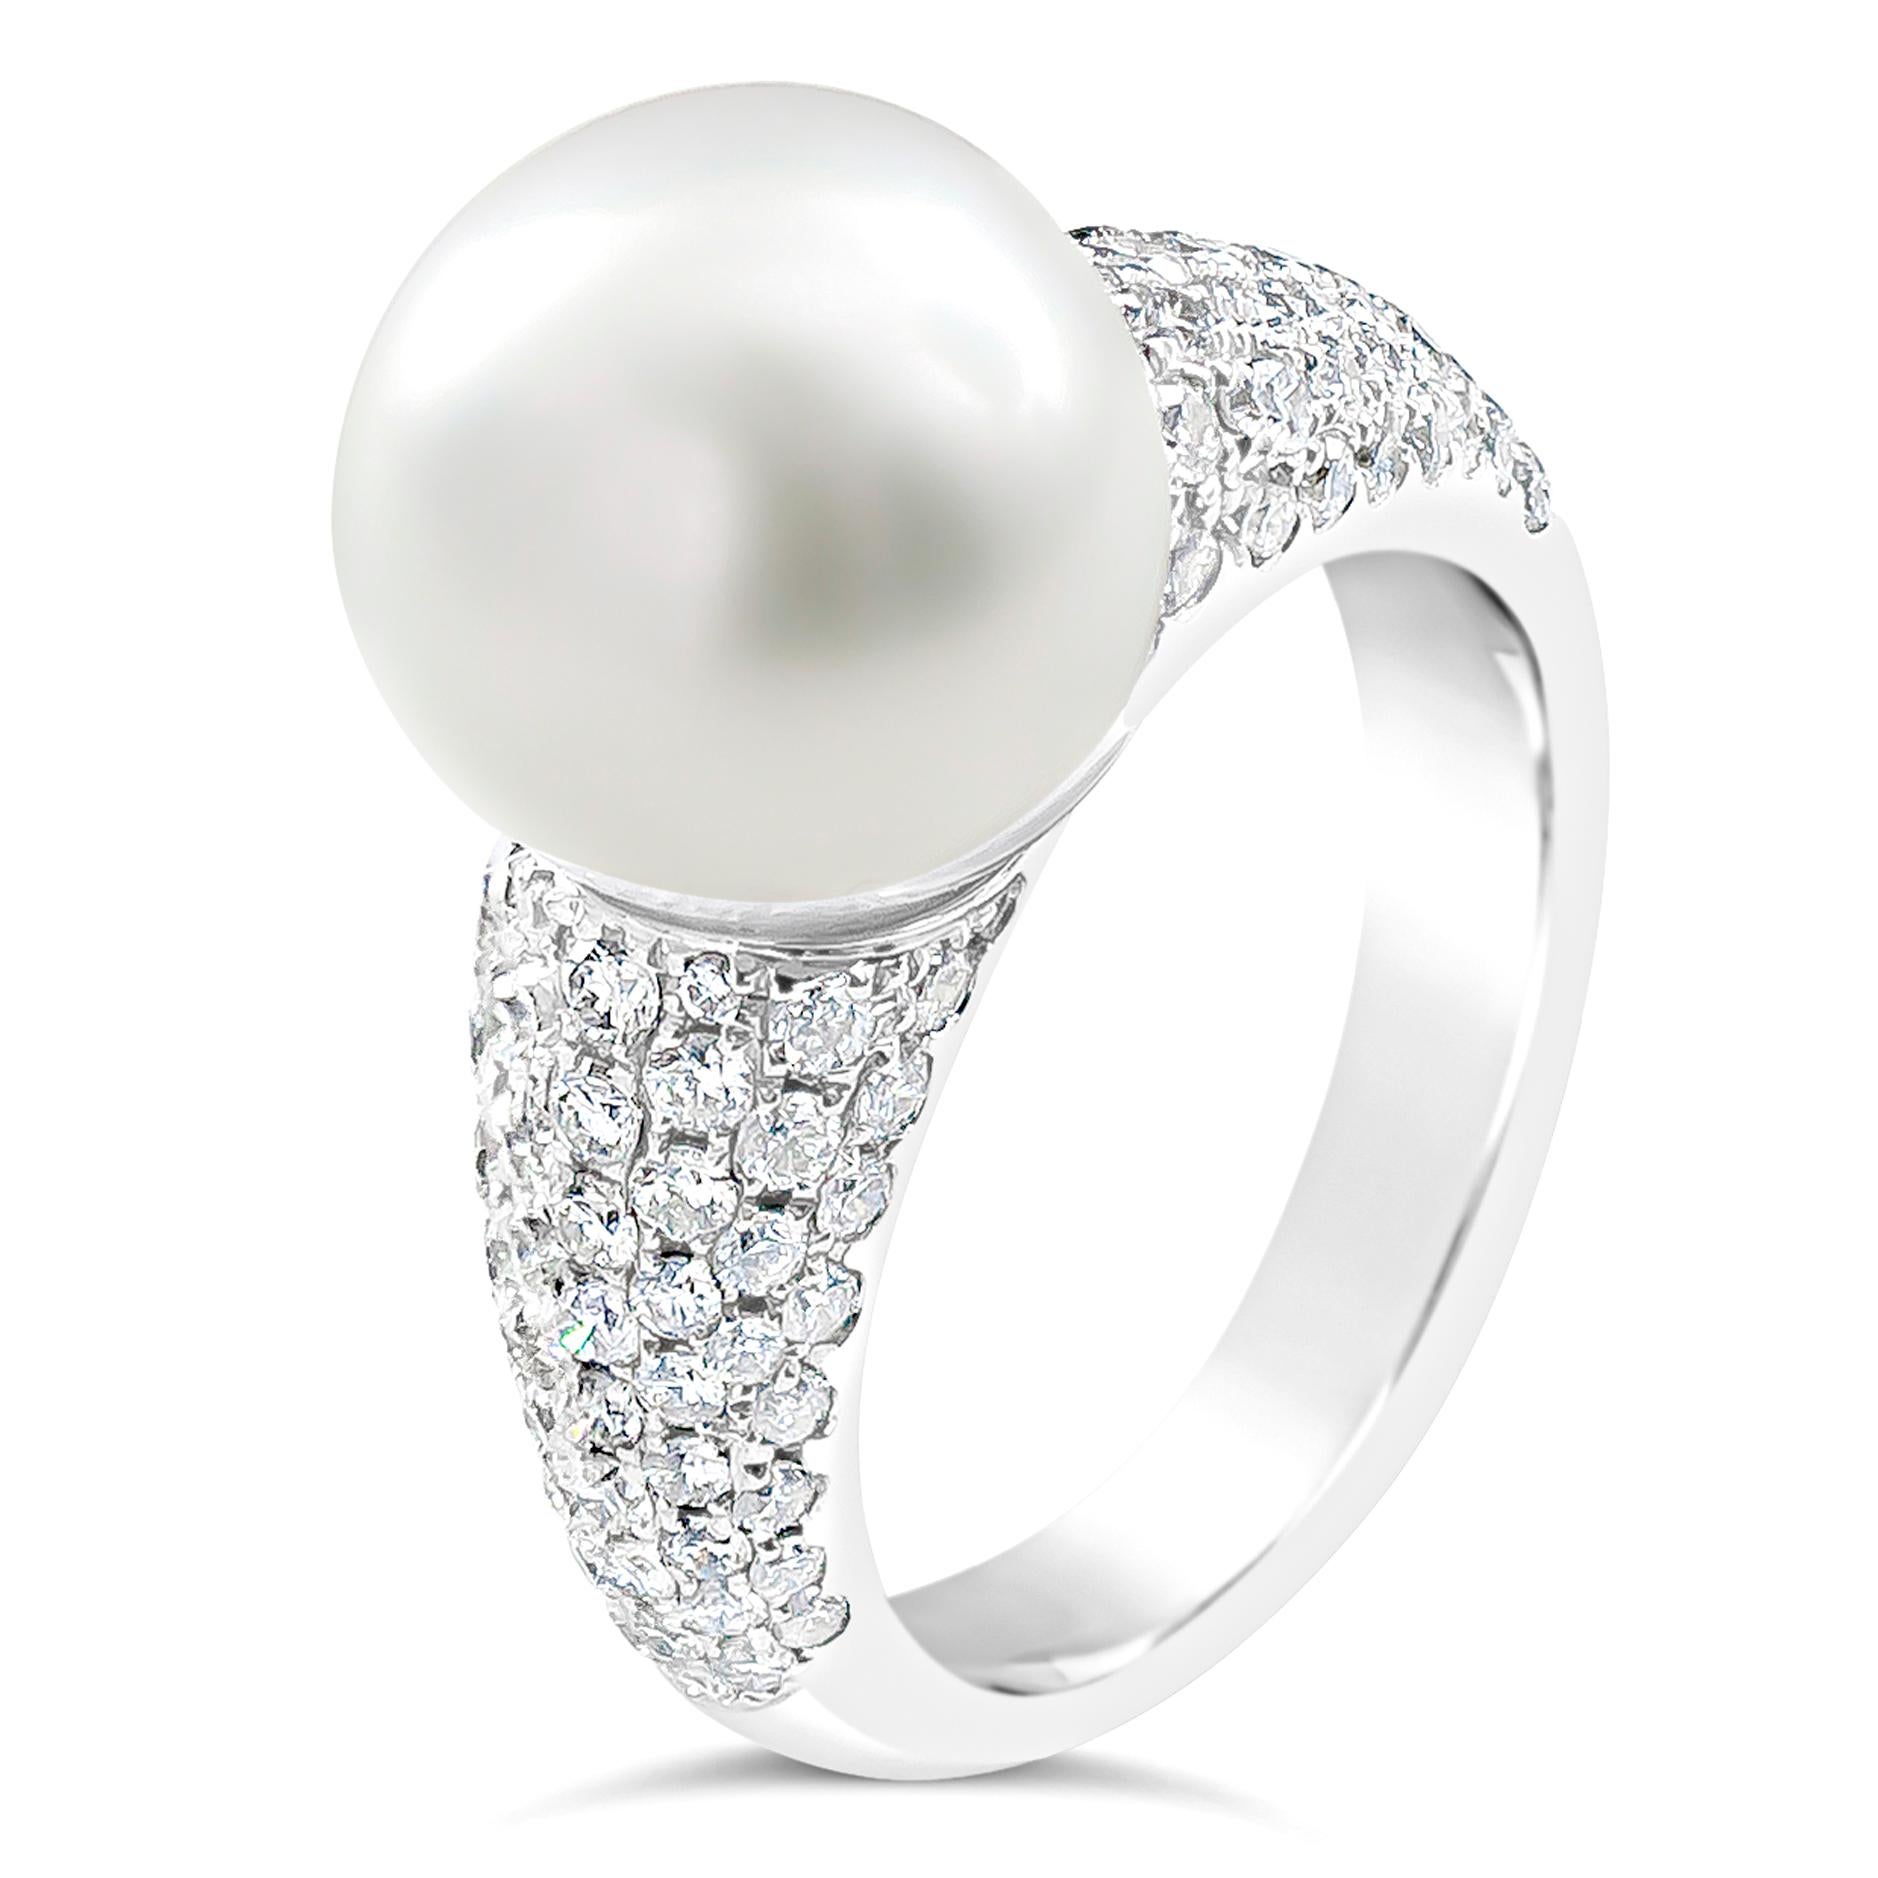 Features a beautiful 12 millimeter cultured south sea pearl set in a lustrous 18k white gold band accented with round brilliant diamonds in a micro-pave design. Diamonds weigh 1.14 carats total.Size 6.5 US resizable upon request.

Roman Malakov is a